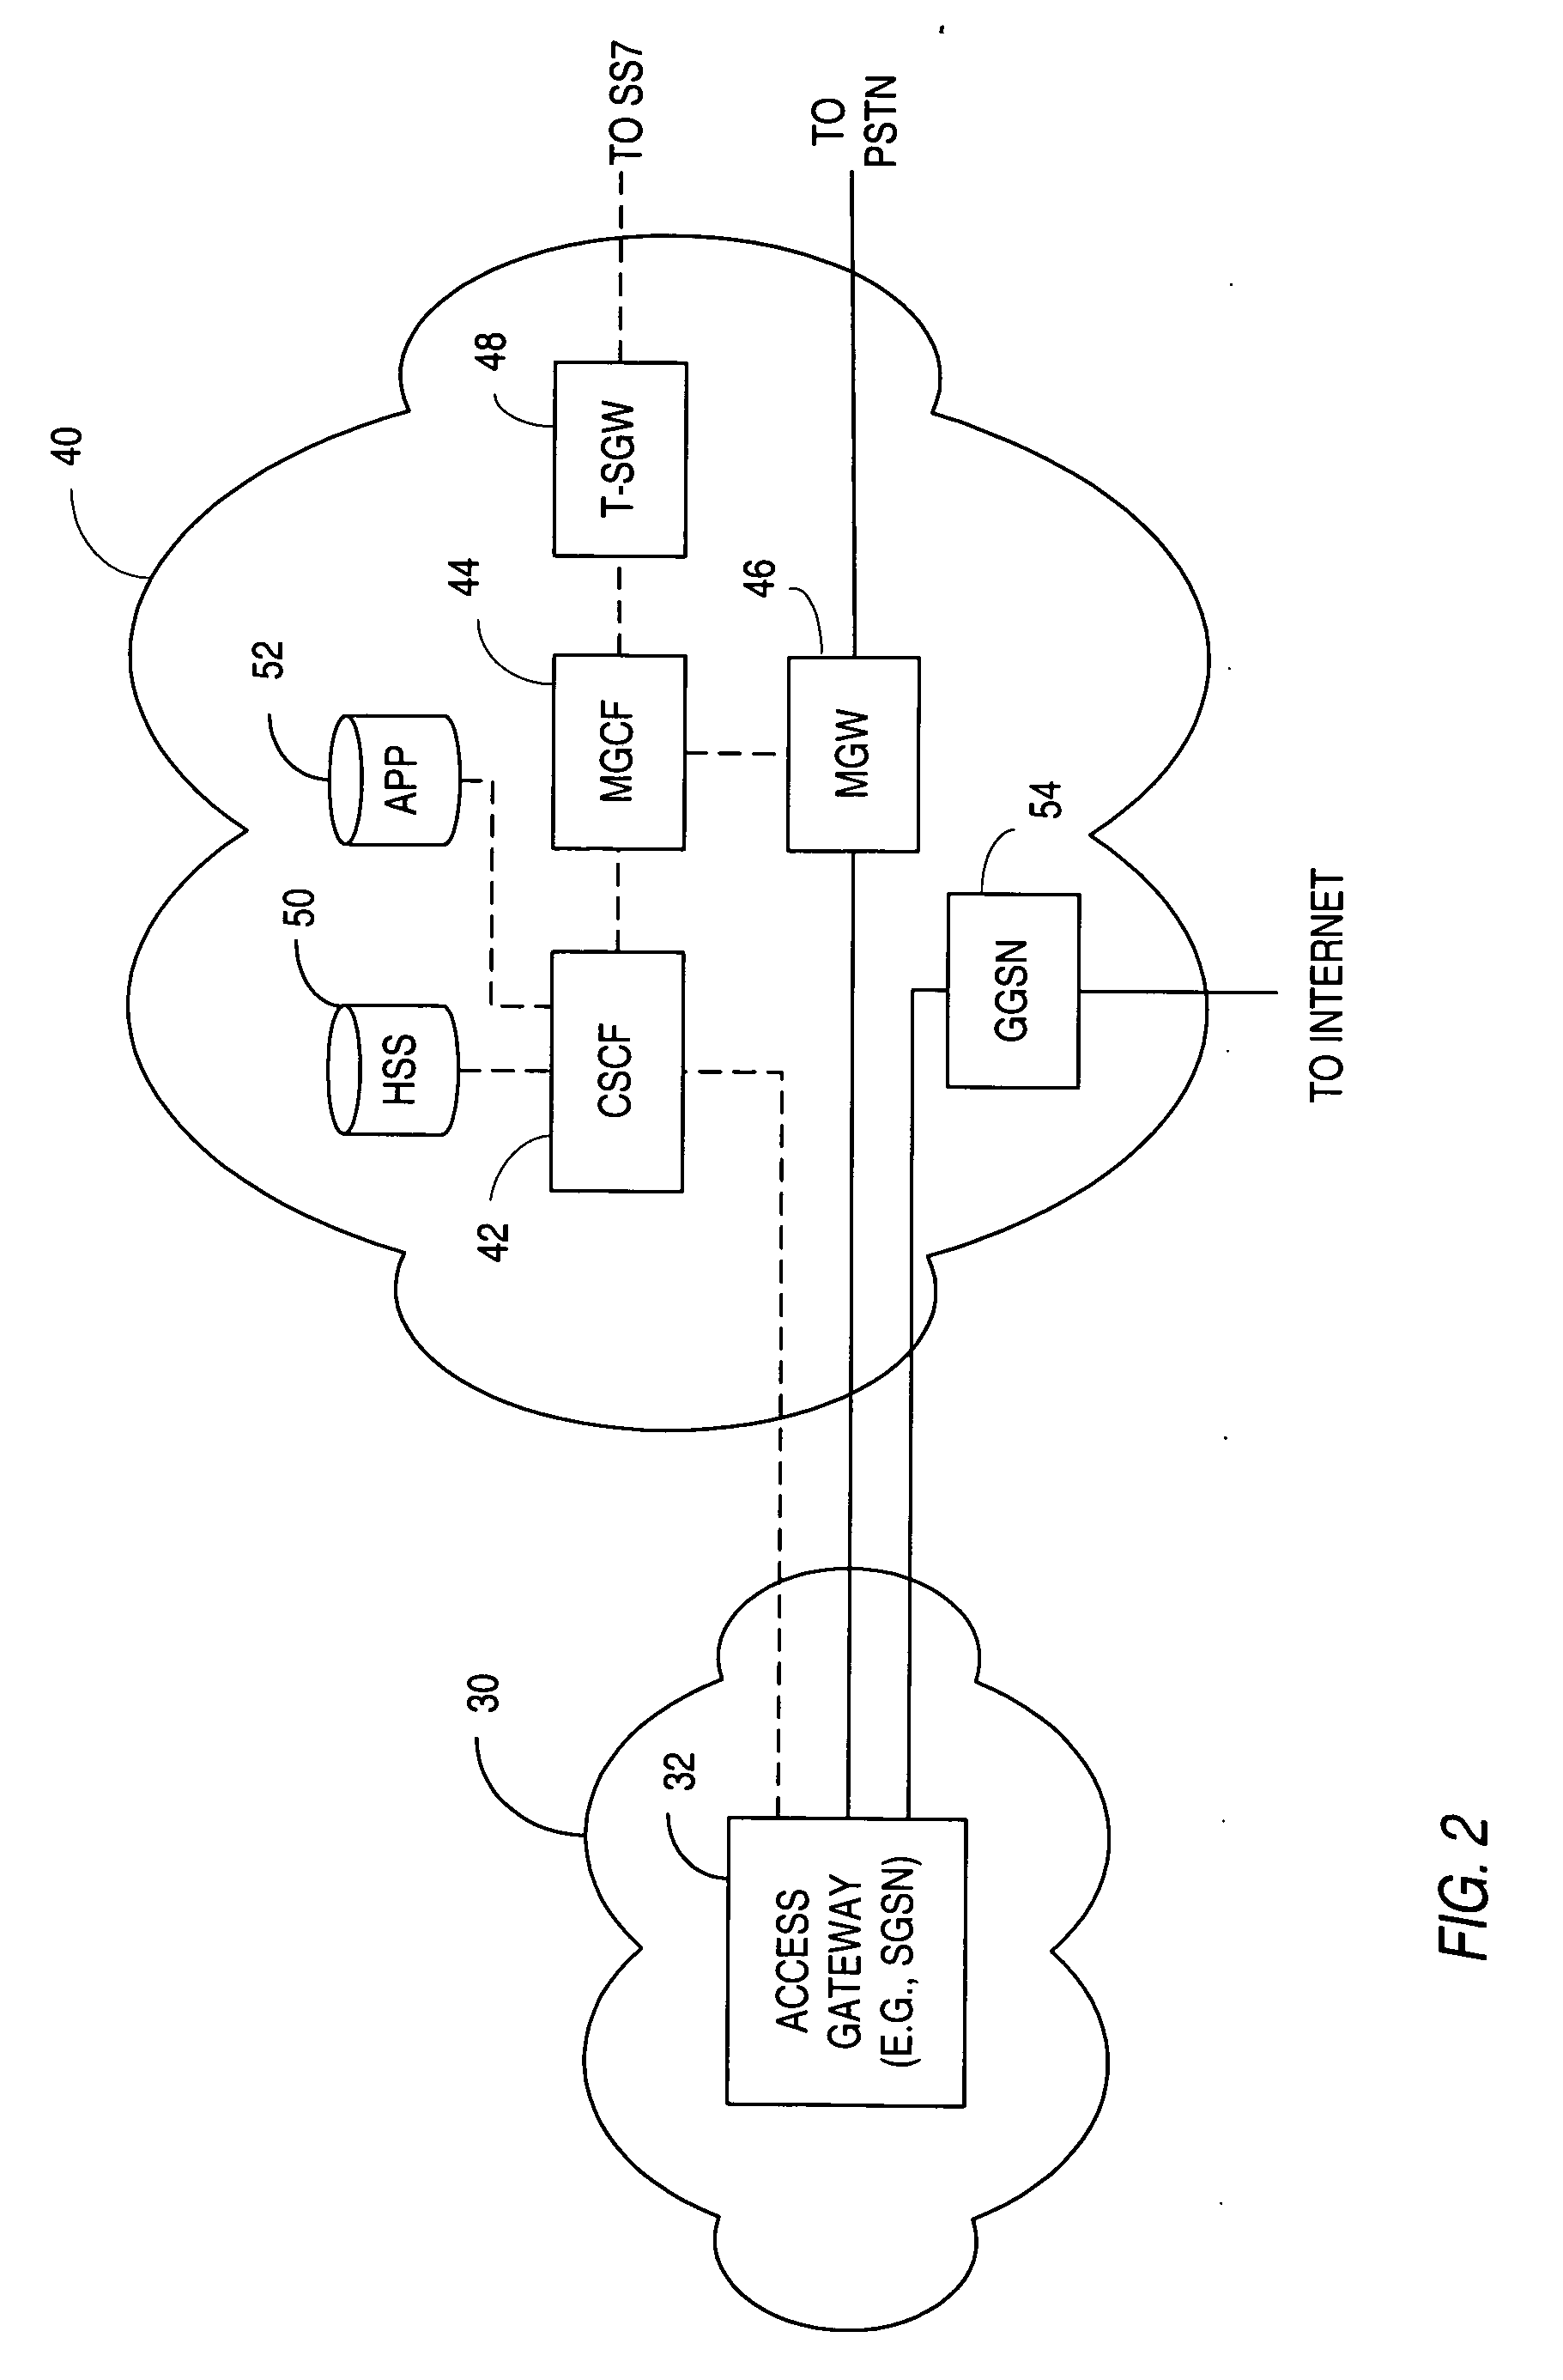 Method for generating and sending signaling messages